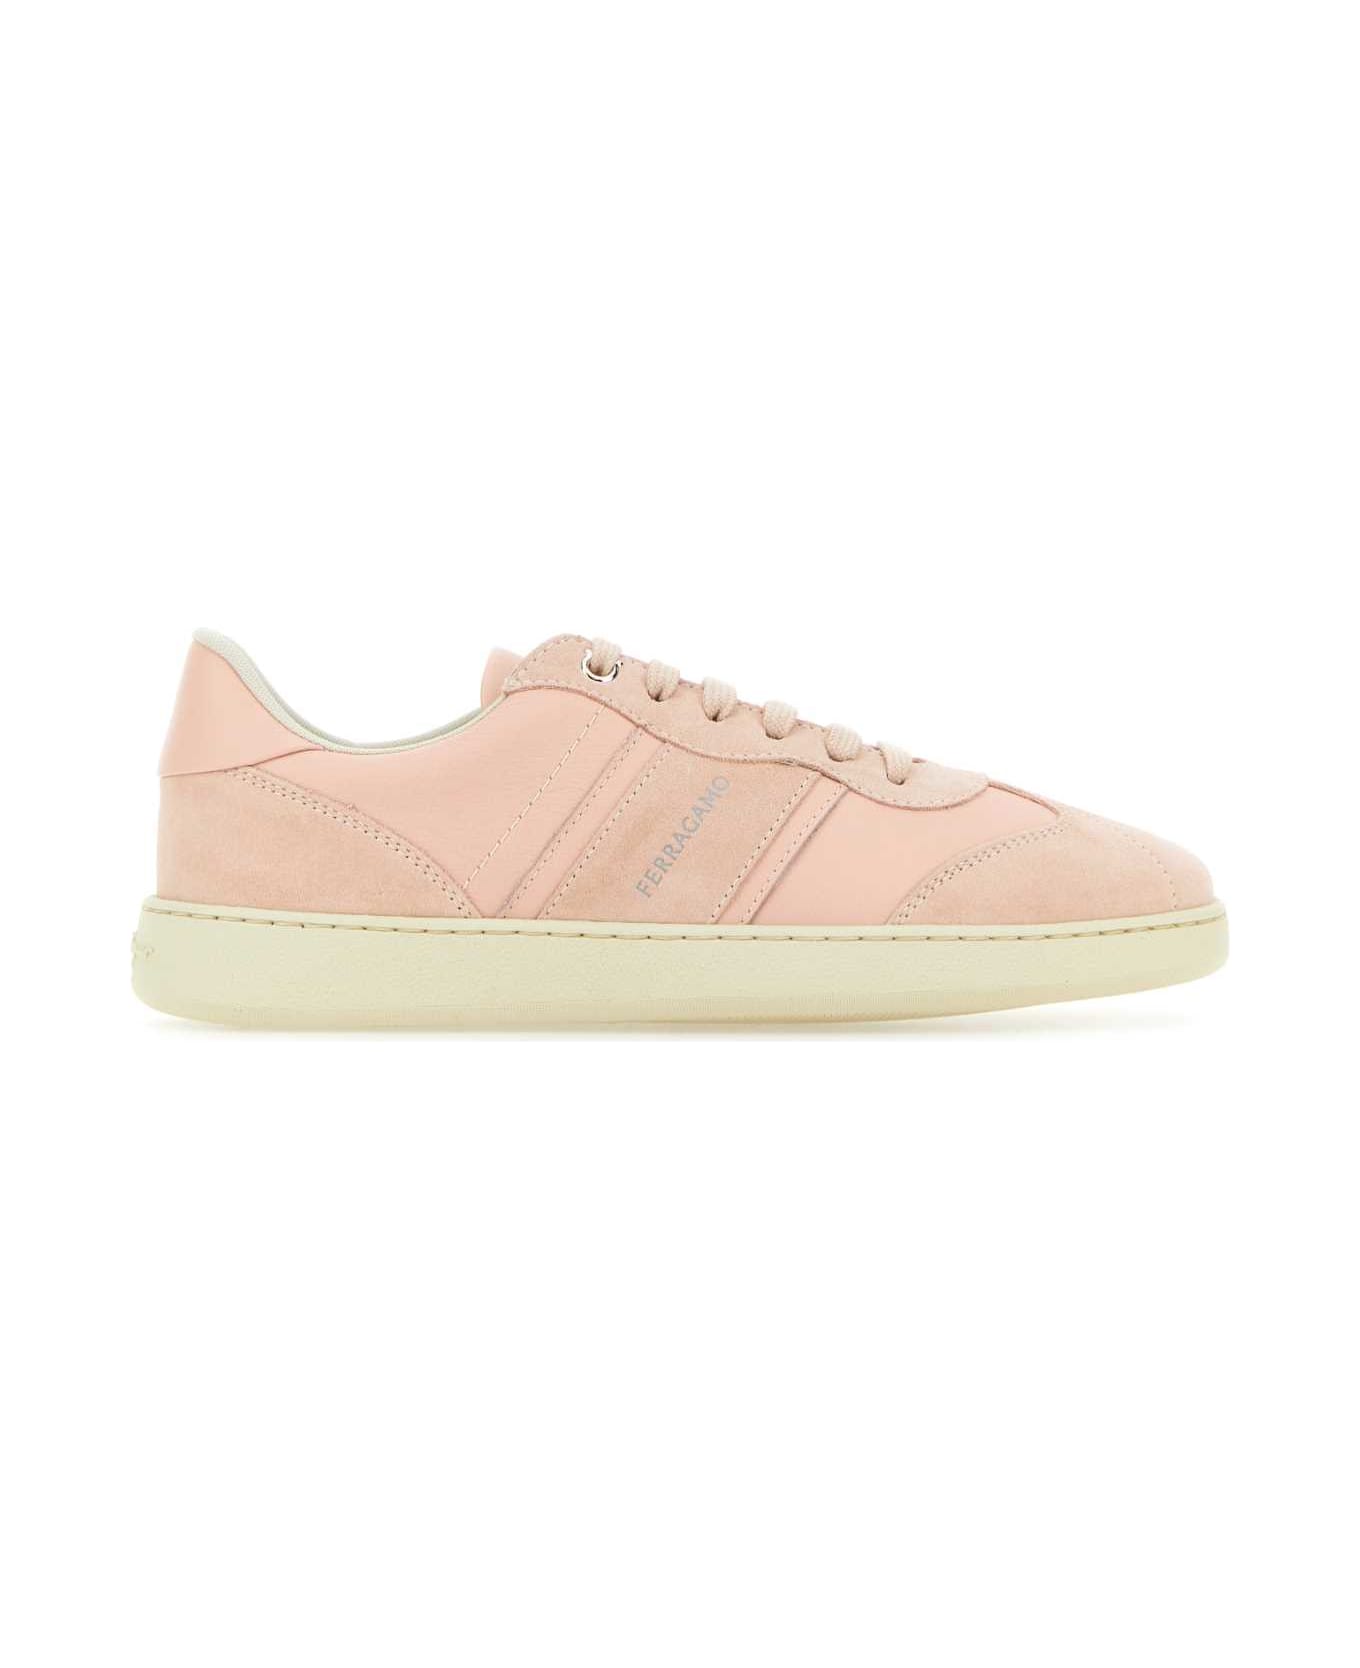 Ferragamo Pastel Pink Leather And Suede Achille Sneakers - NYLUNDPINK